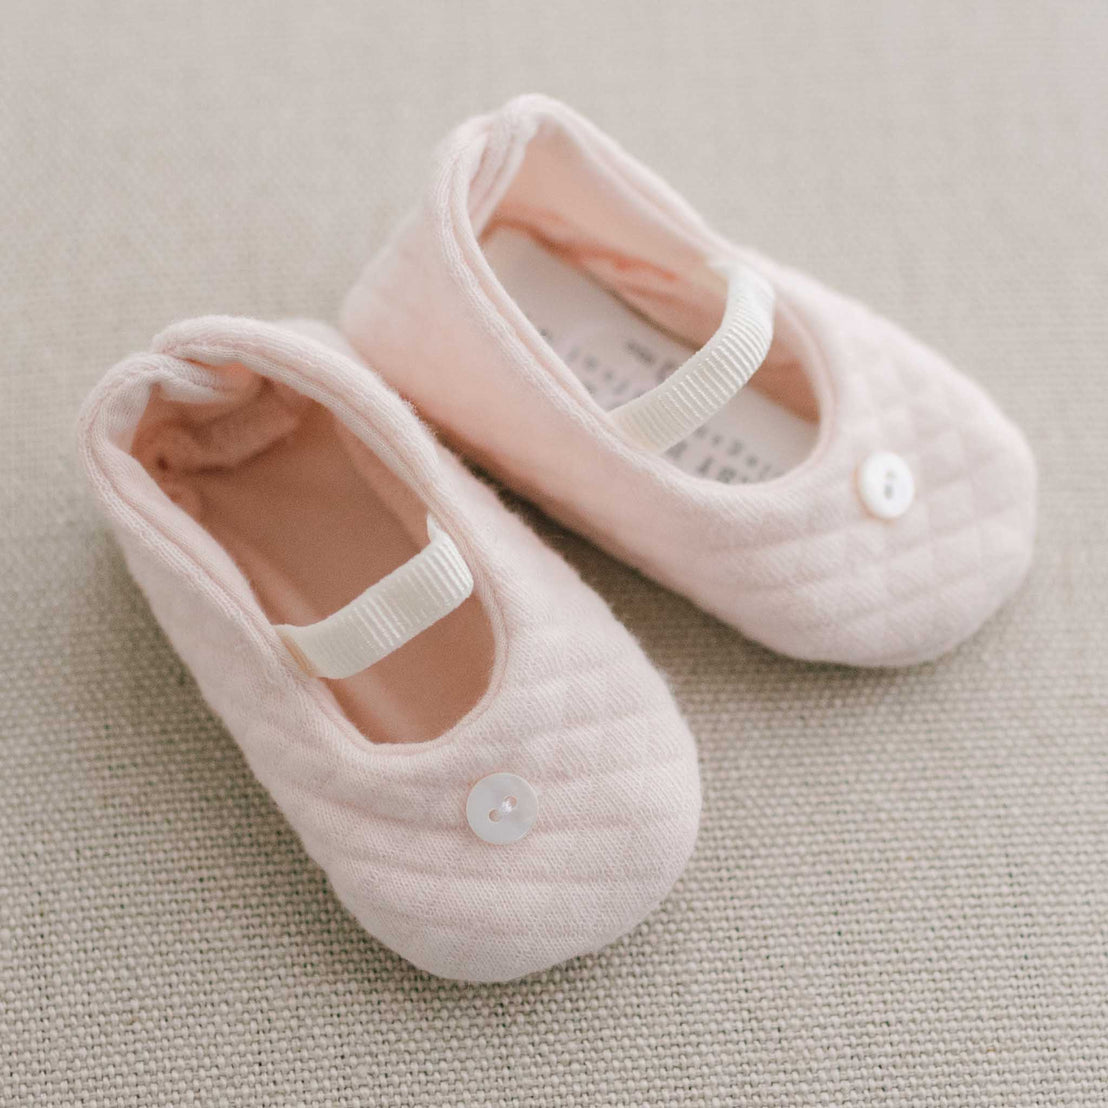 A pair of Ava Quilted Booties in blush pink, each adorned with a small white button, resting on a soft grey textured background.